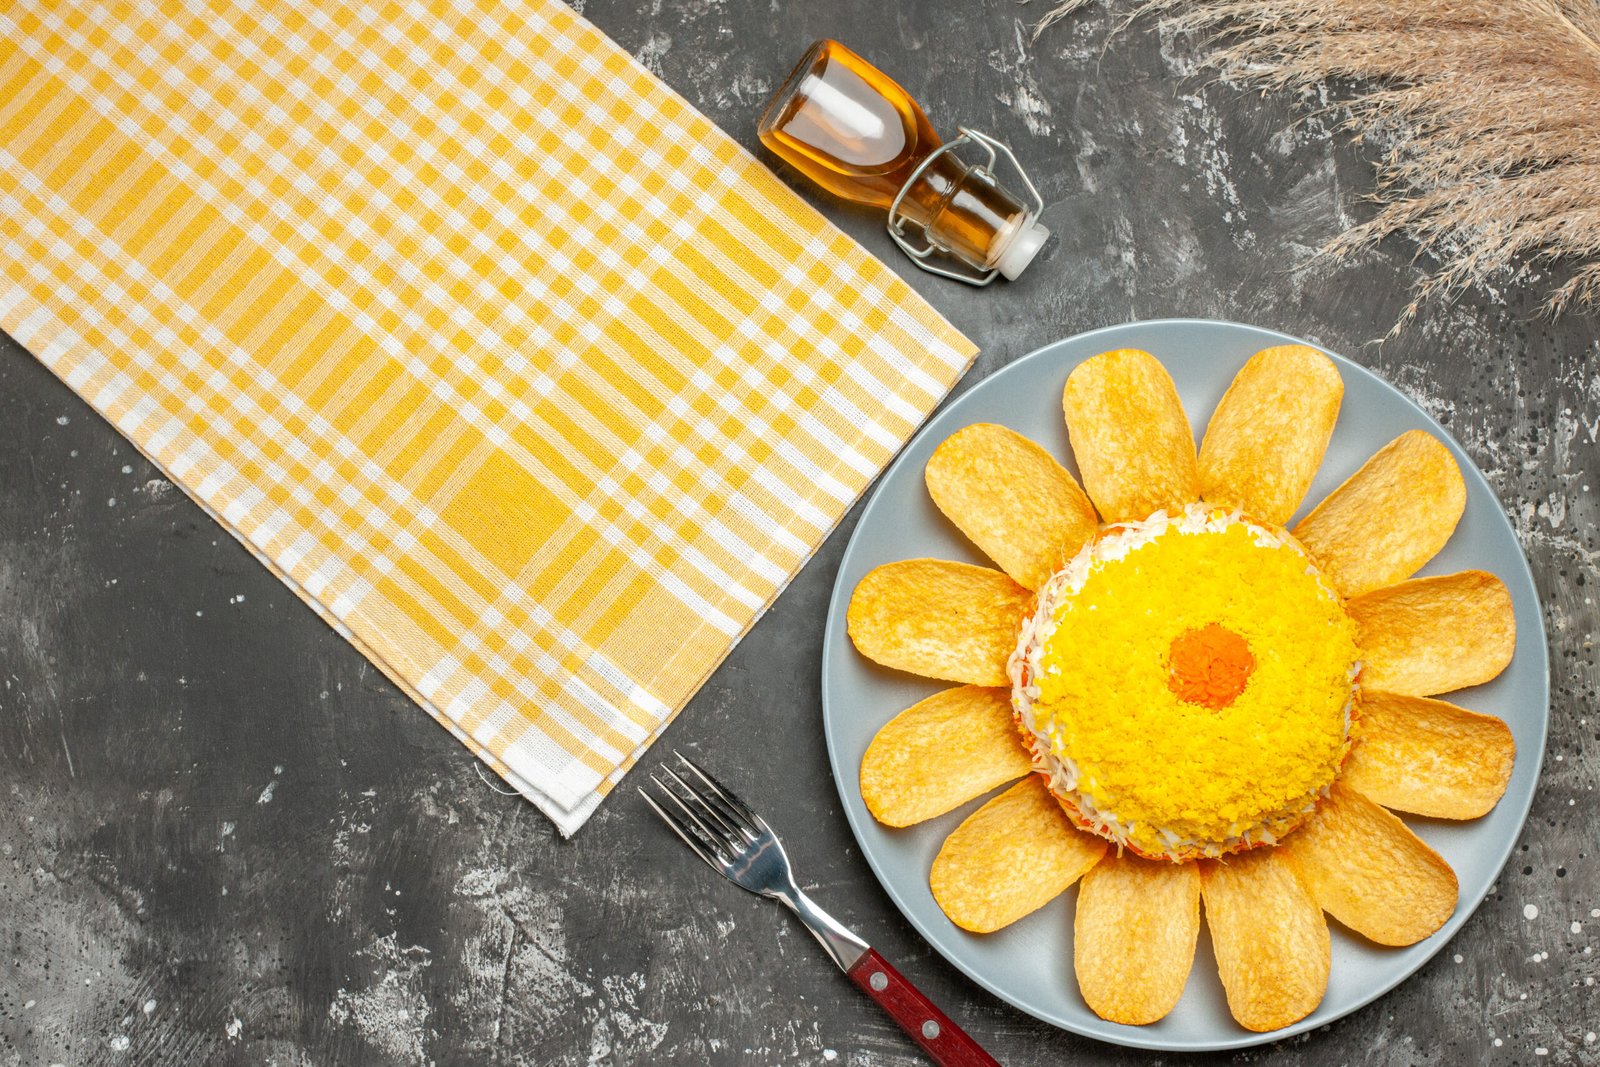 Yellow kitchen towel beside a plate with a yellow flower on it.